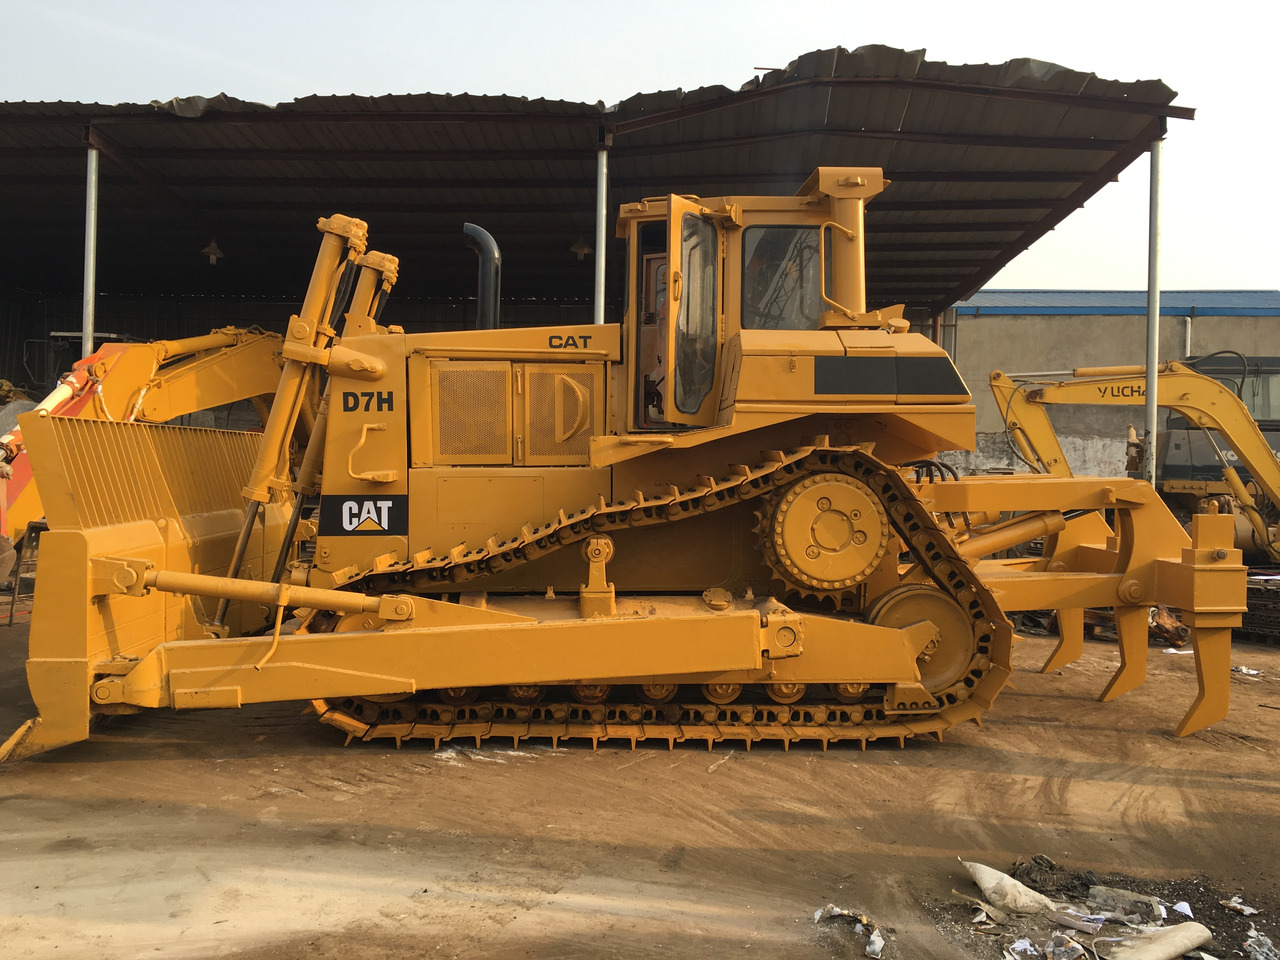 Nowy Spycharka Famous brand CATERPILLAR D7H in good condition on sale: zdjęcie 4